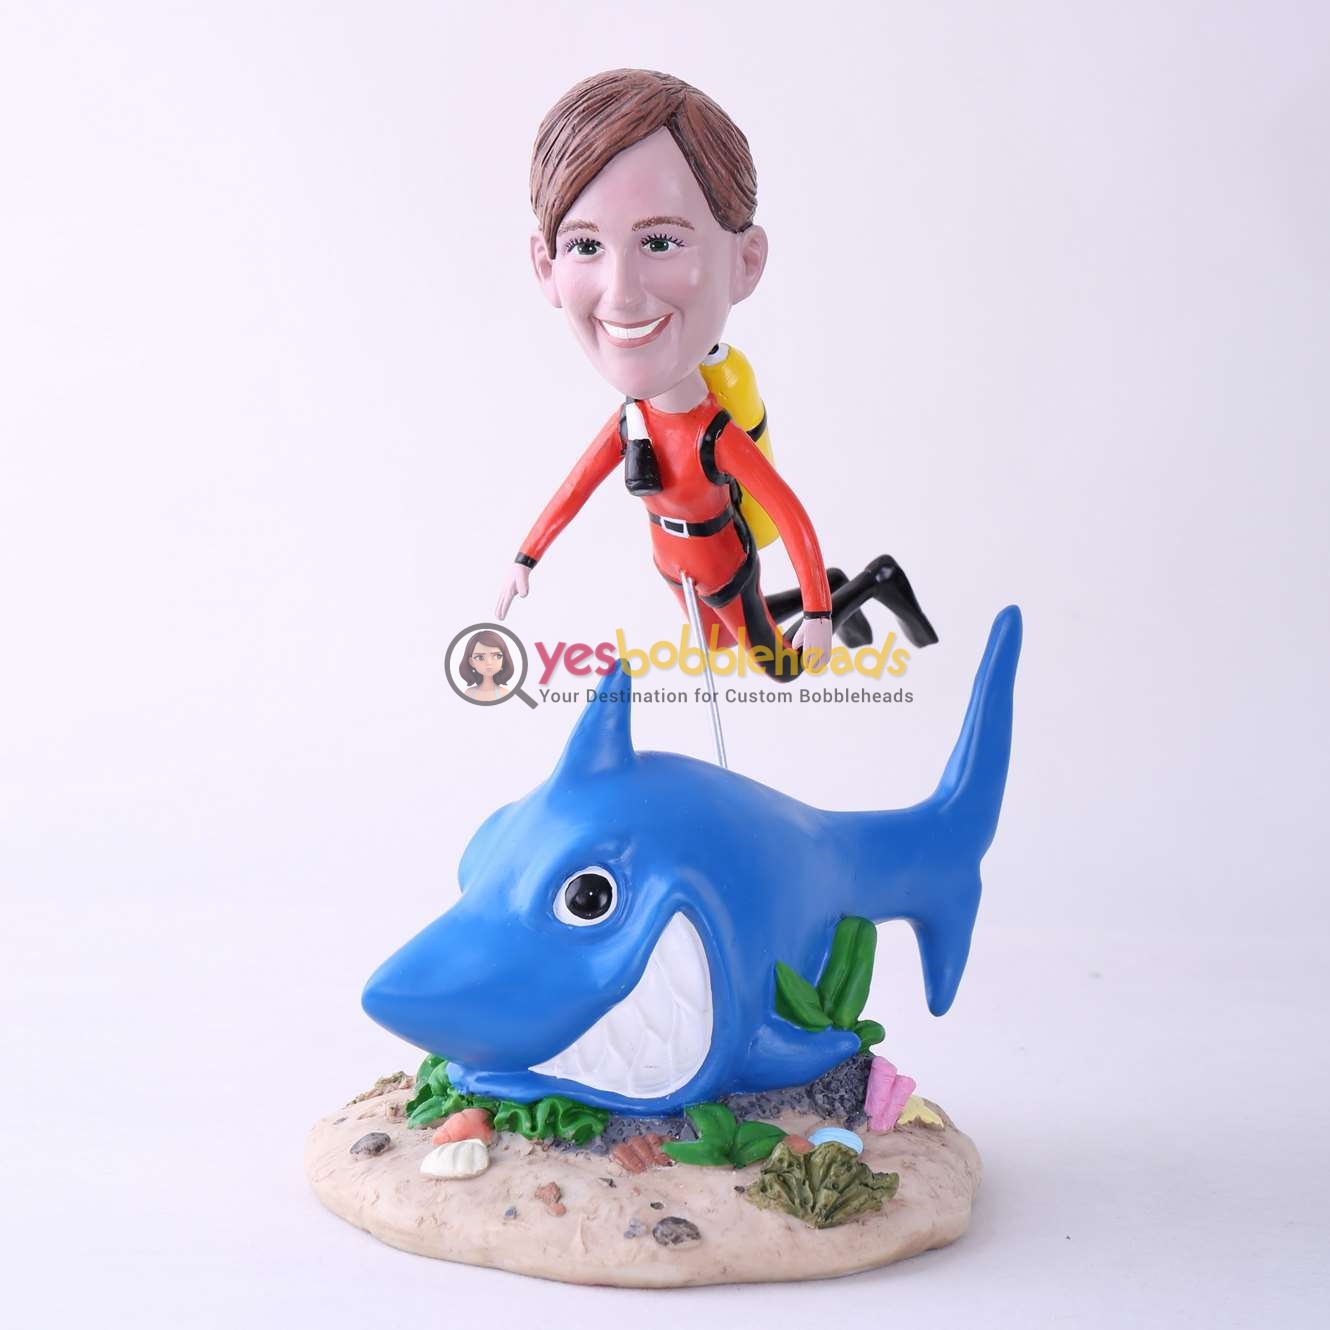 Picture of Custom Bobblehead Doll: Scuba Diving Woman